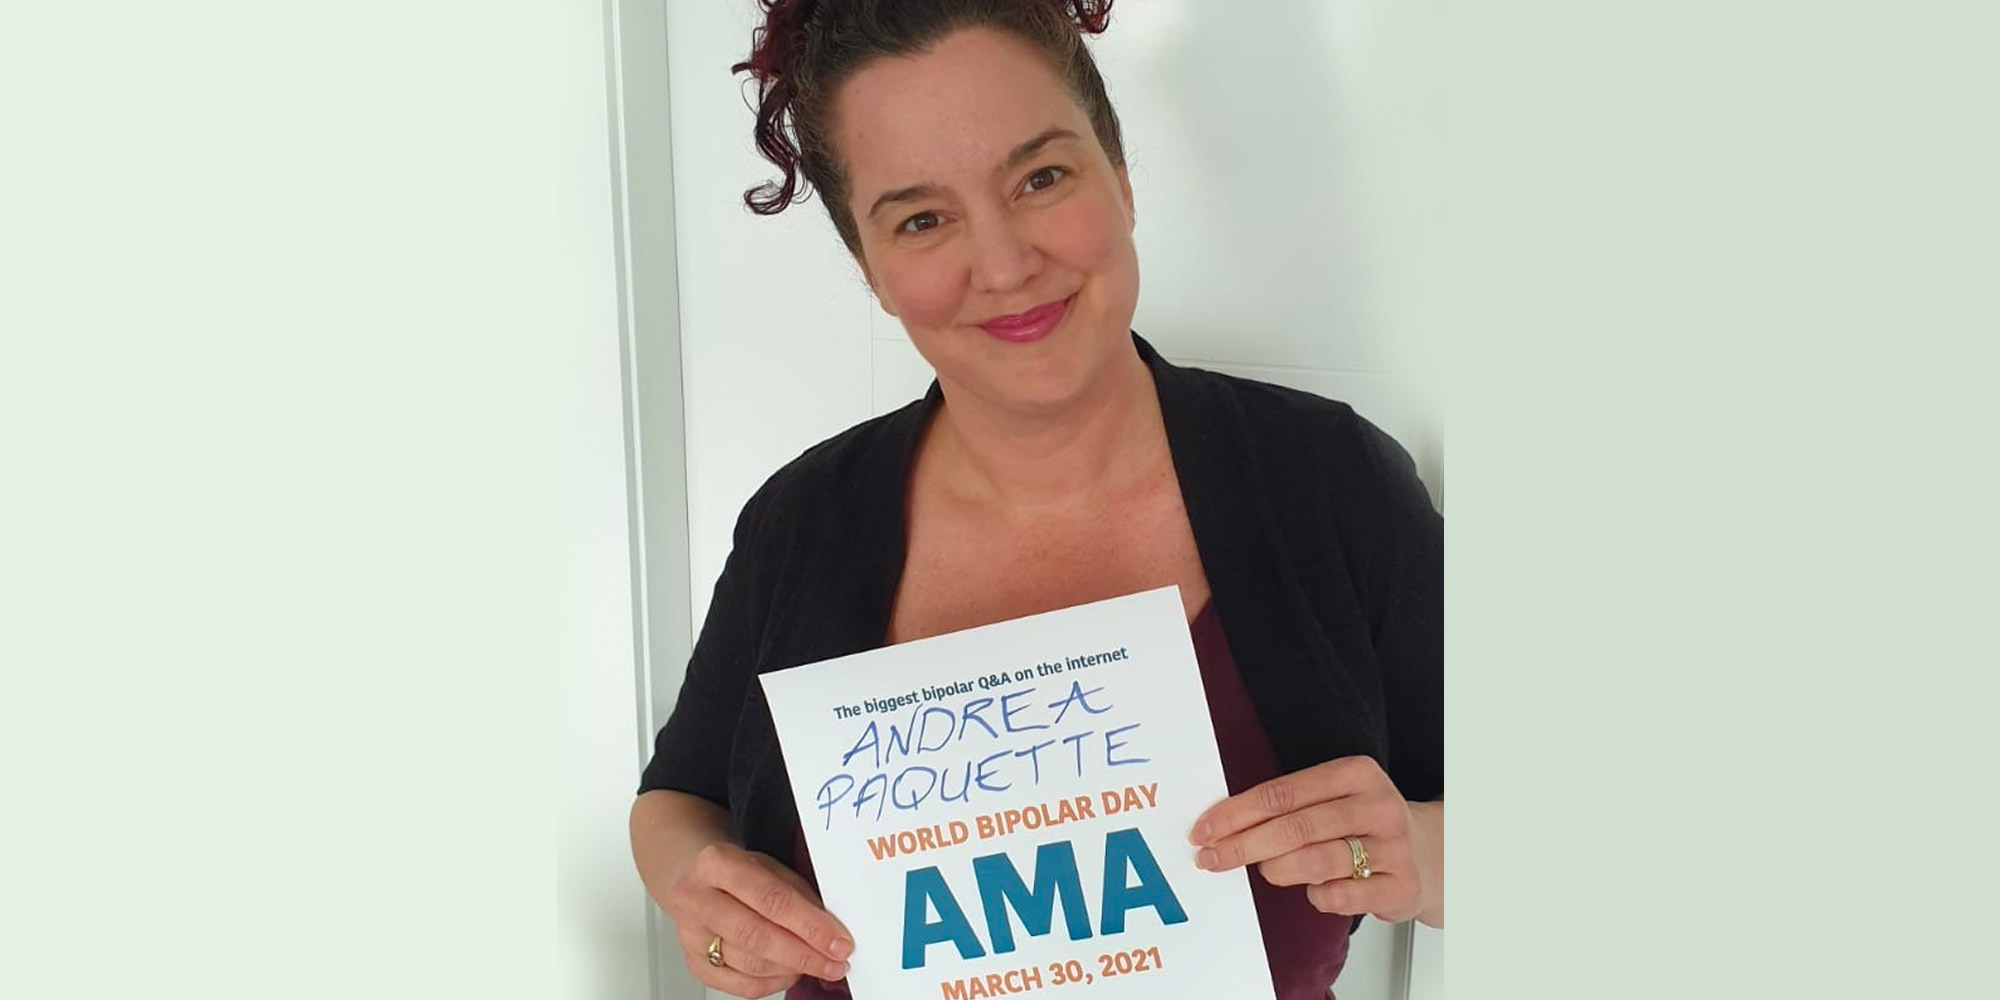 Andrea is wearing a black cardigan and holding an AMA proof sign with her name written on it. She is Caucasian and has dark curly hair with red tips. She is smiling warmly.